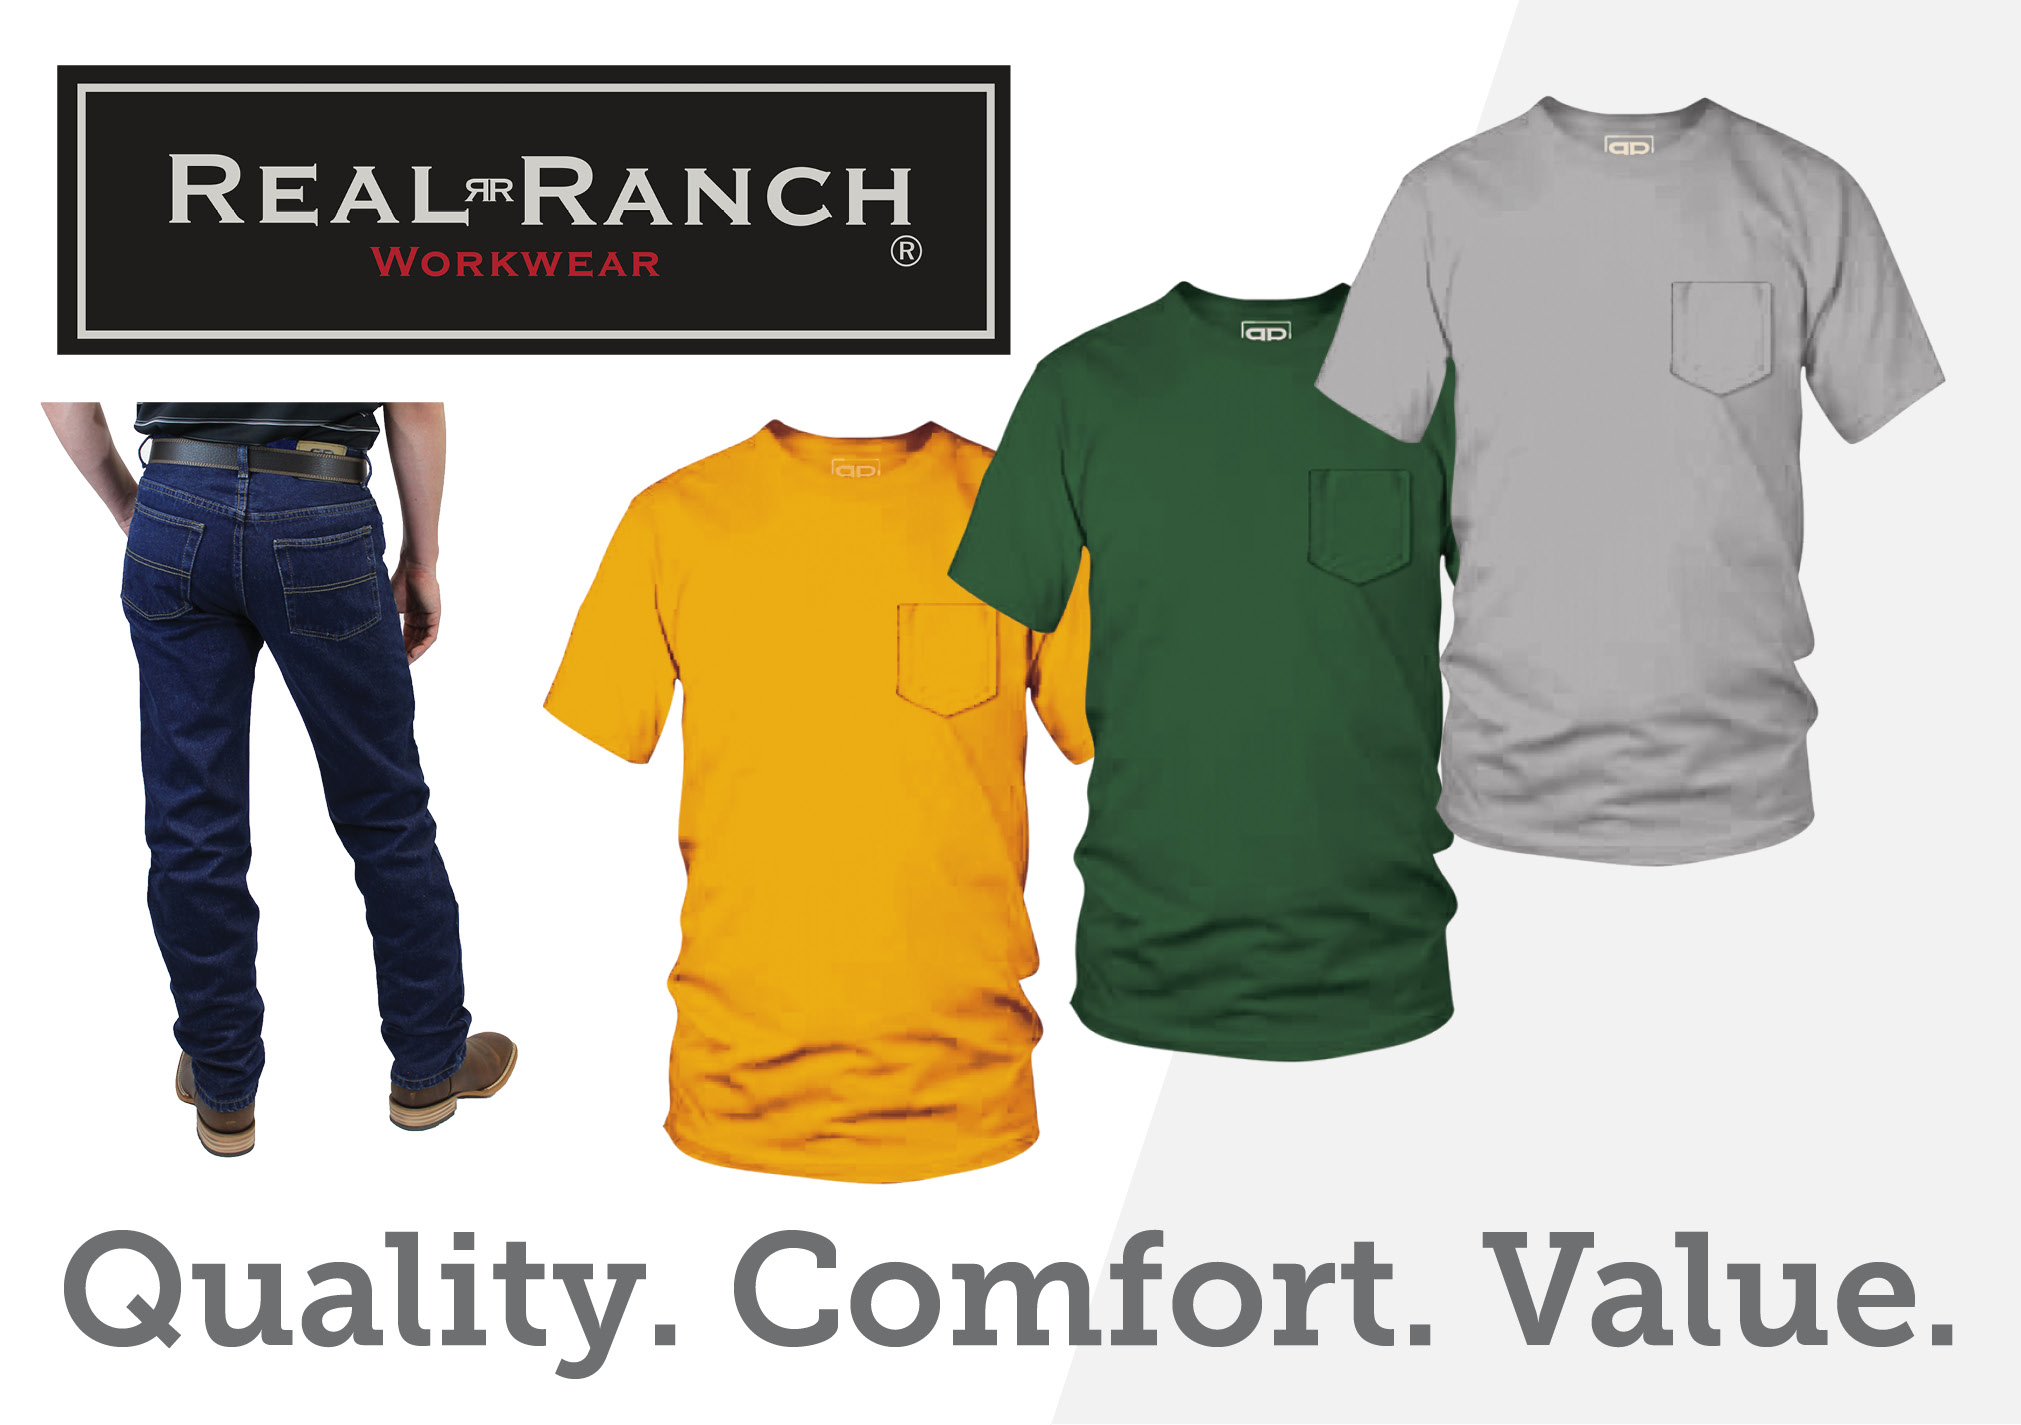 Real Ranch Quality. Comfort. Value.